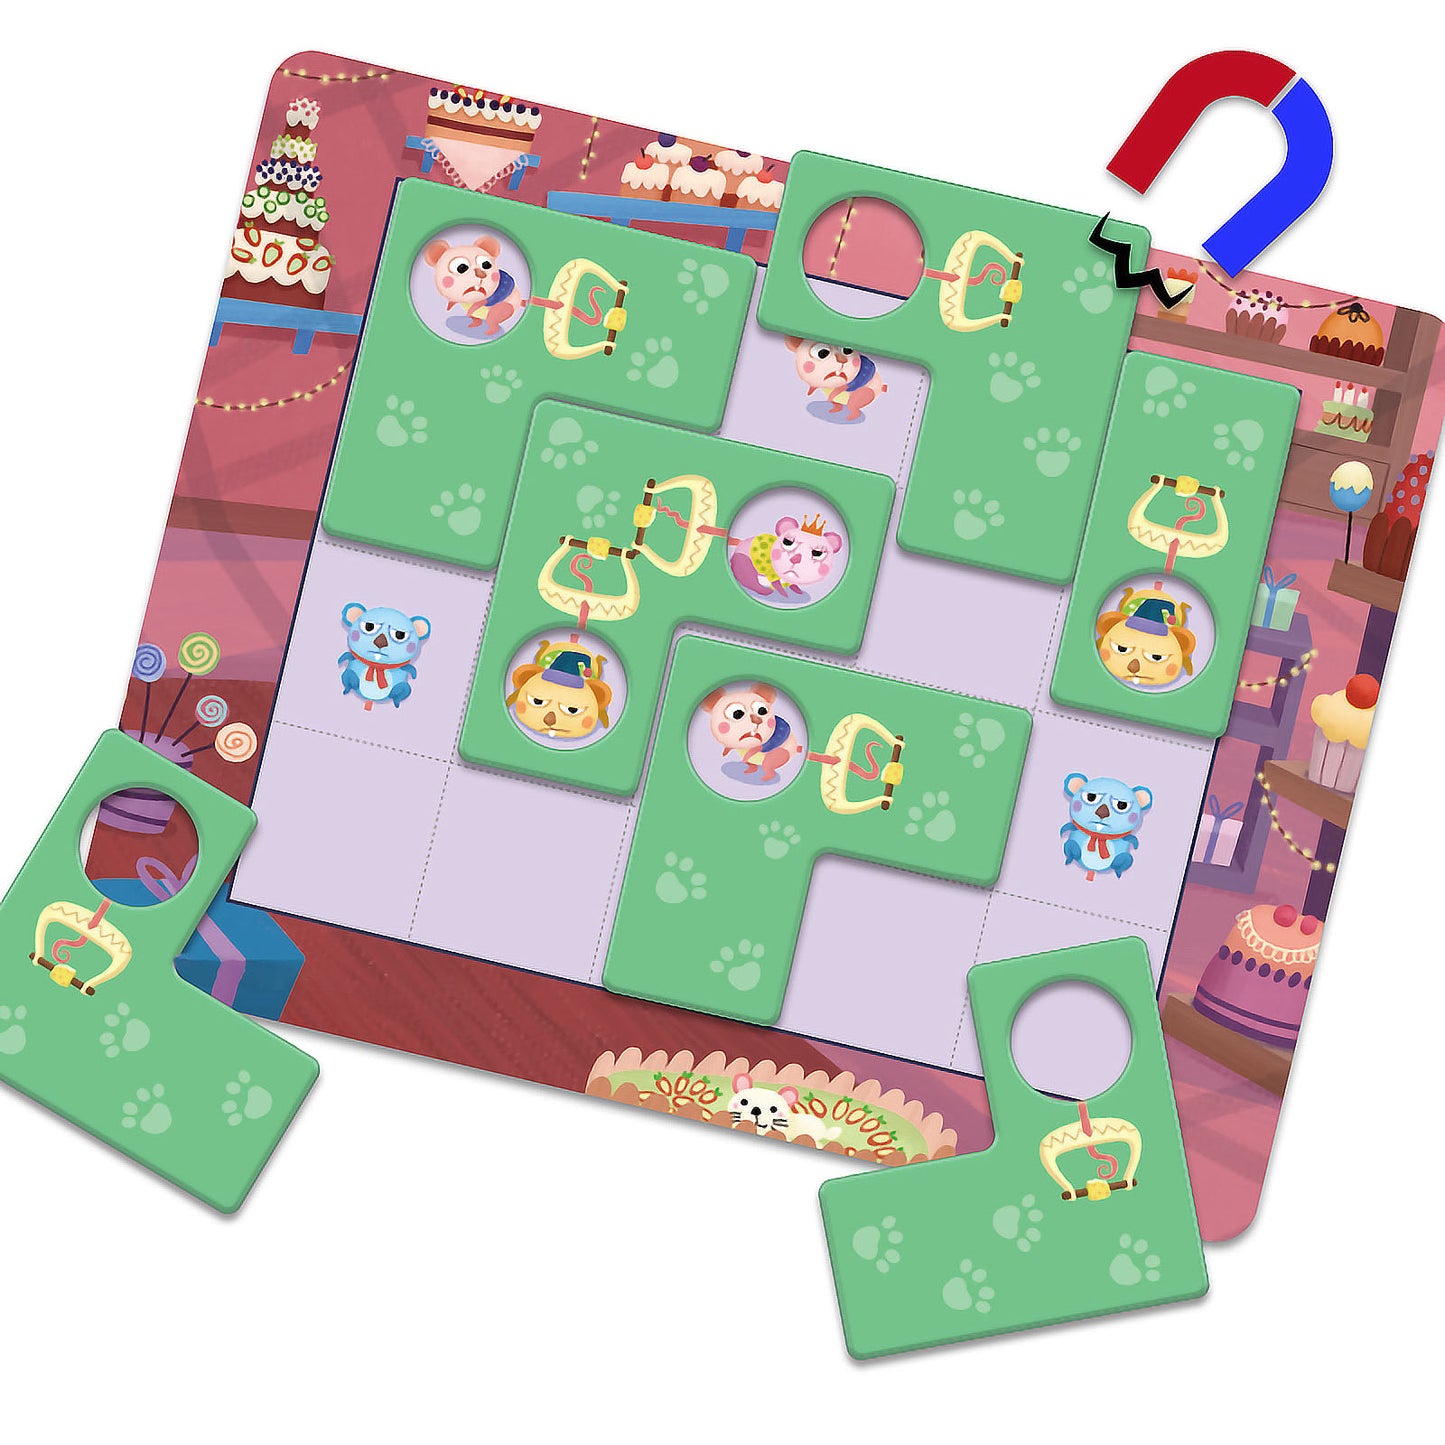 NOOLY Matching Game, Puzzle Game for Kids, PW0433 ( Run, little mouse)